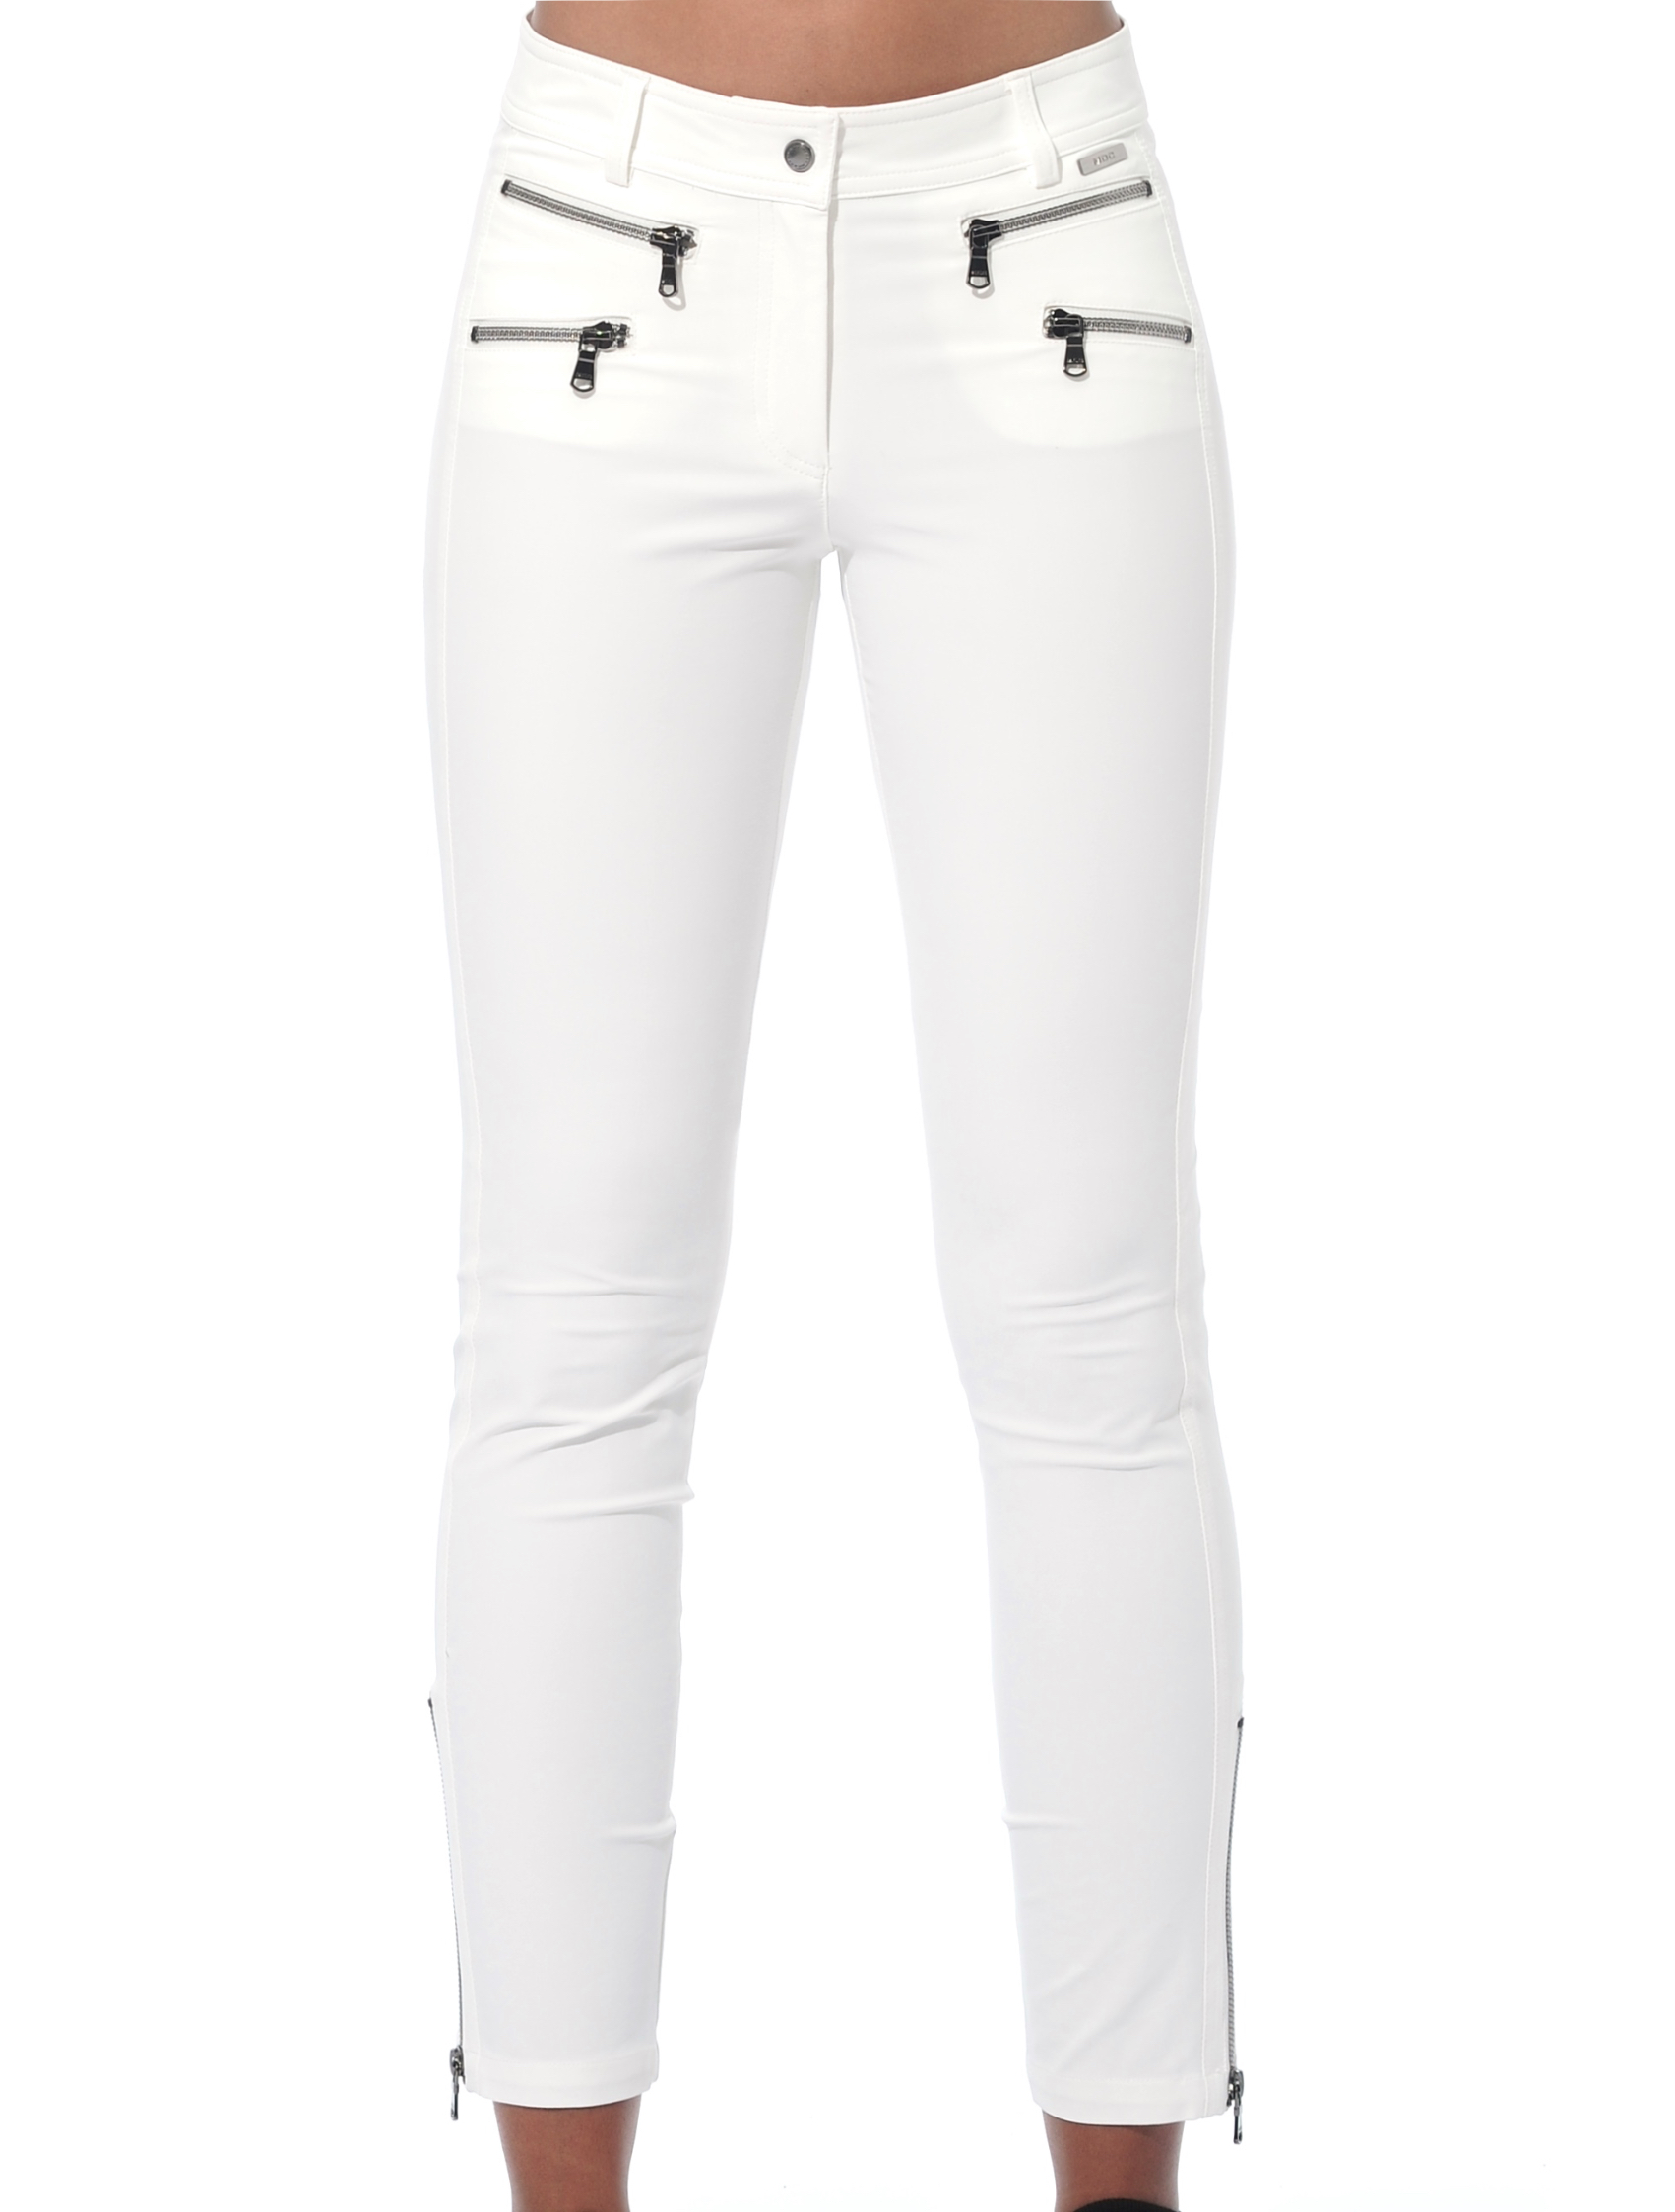 4way stretch double zip ankle pants creamy 